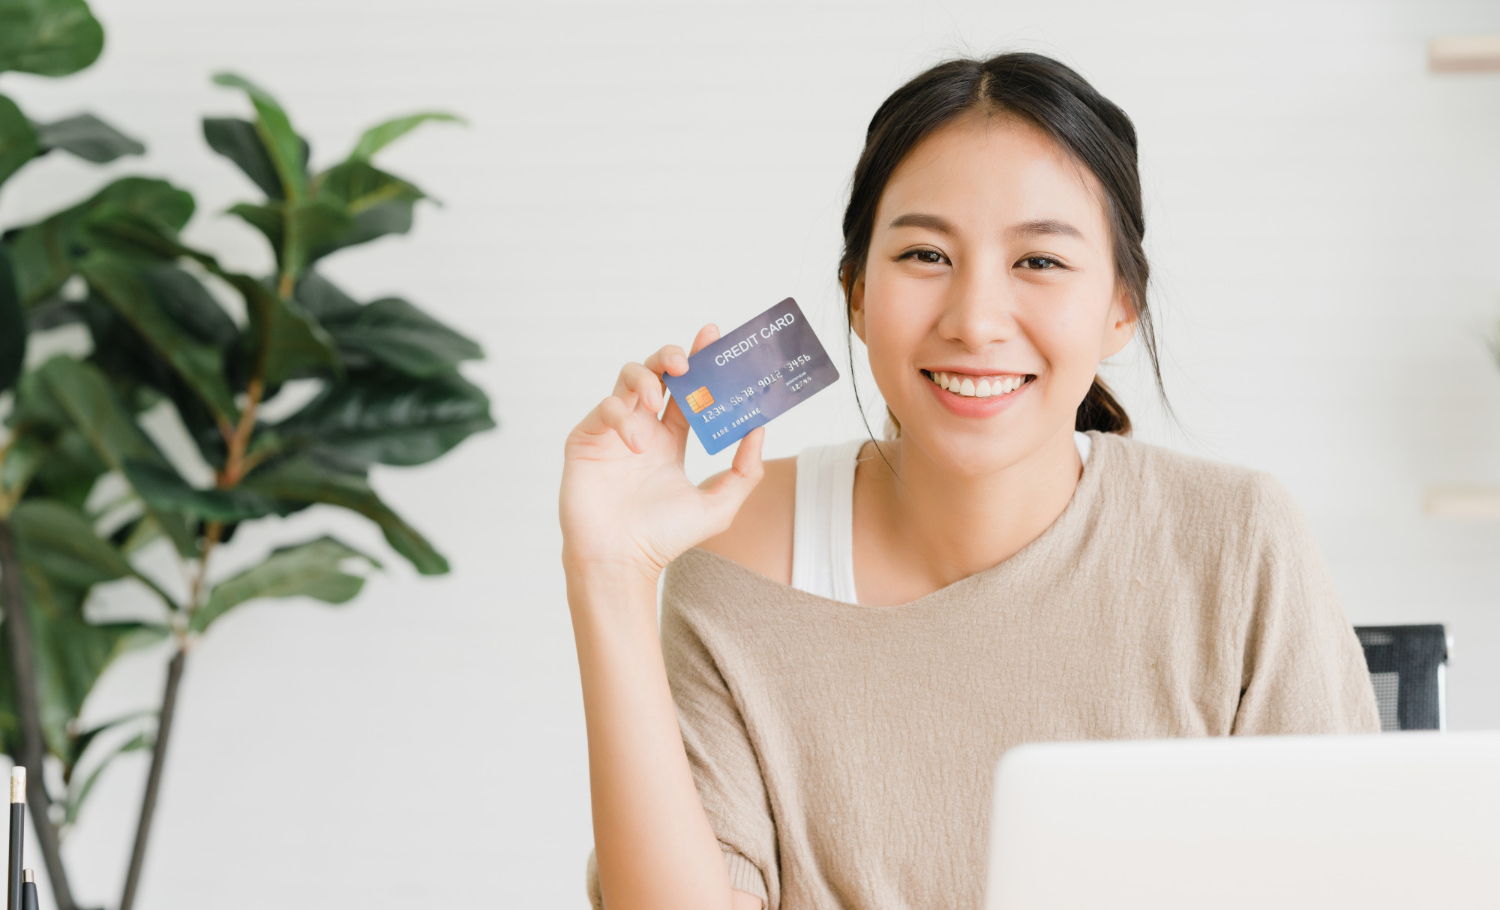 Choosing a new credit card is an important decision, so pay attention to these tips. Source: Freepik.